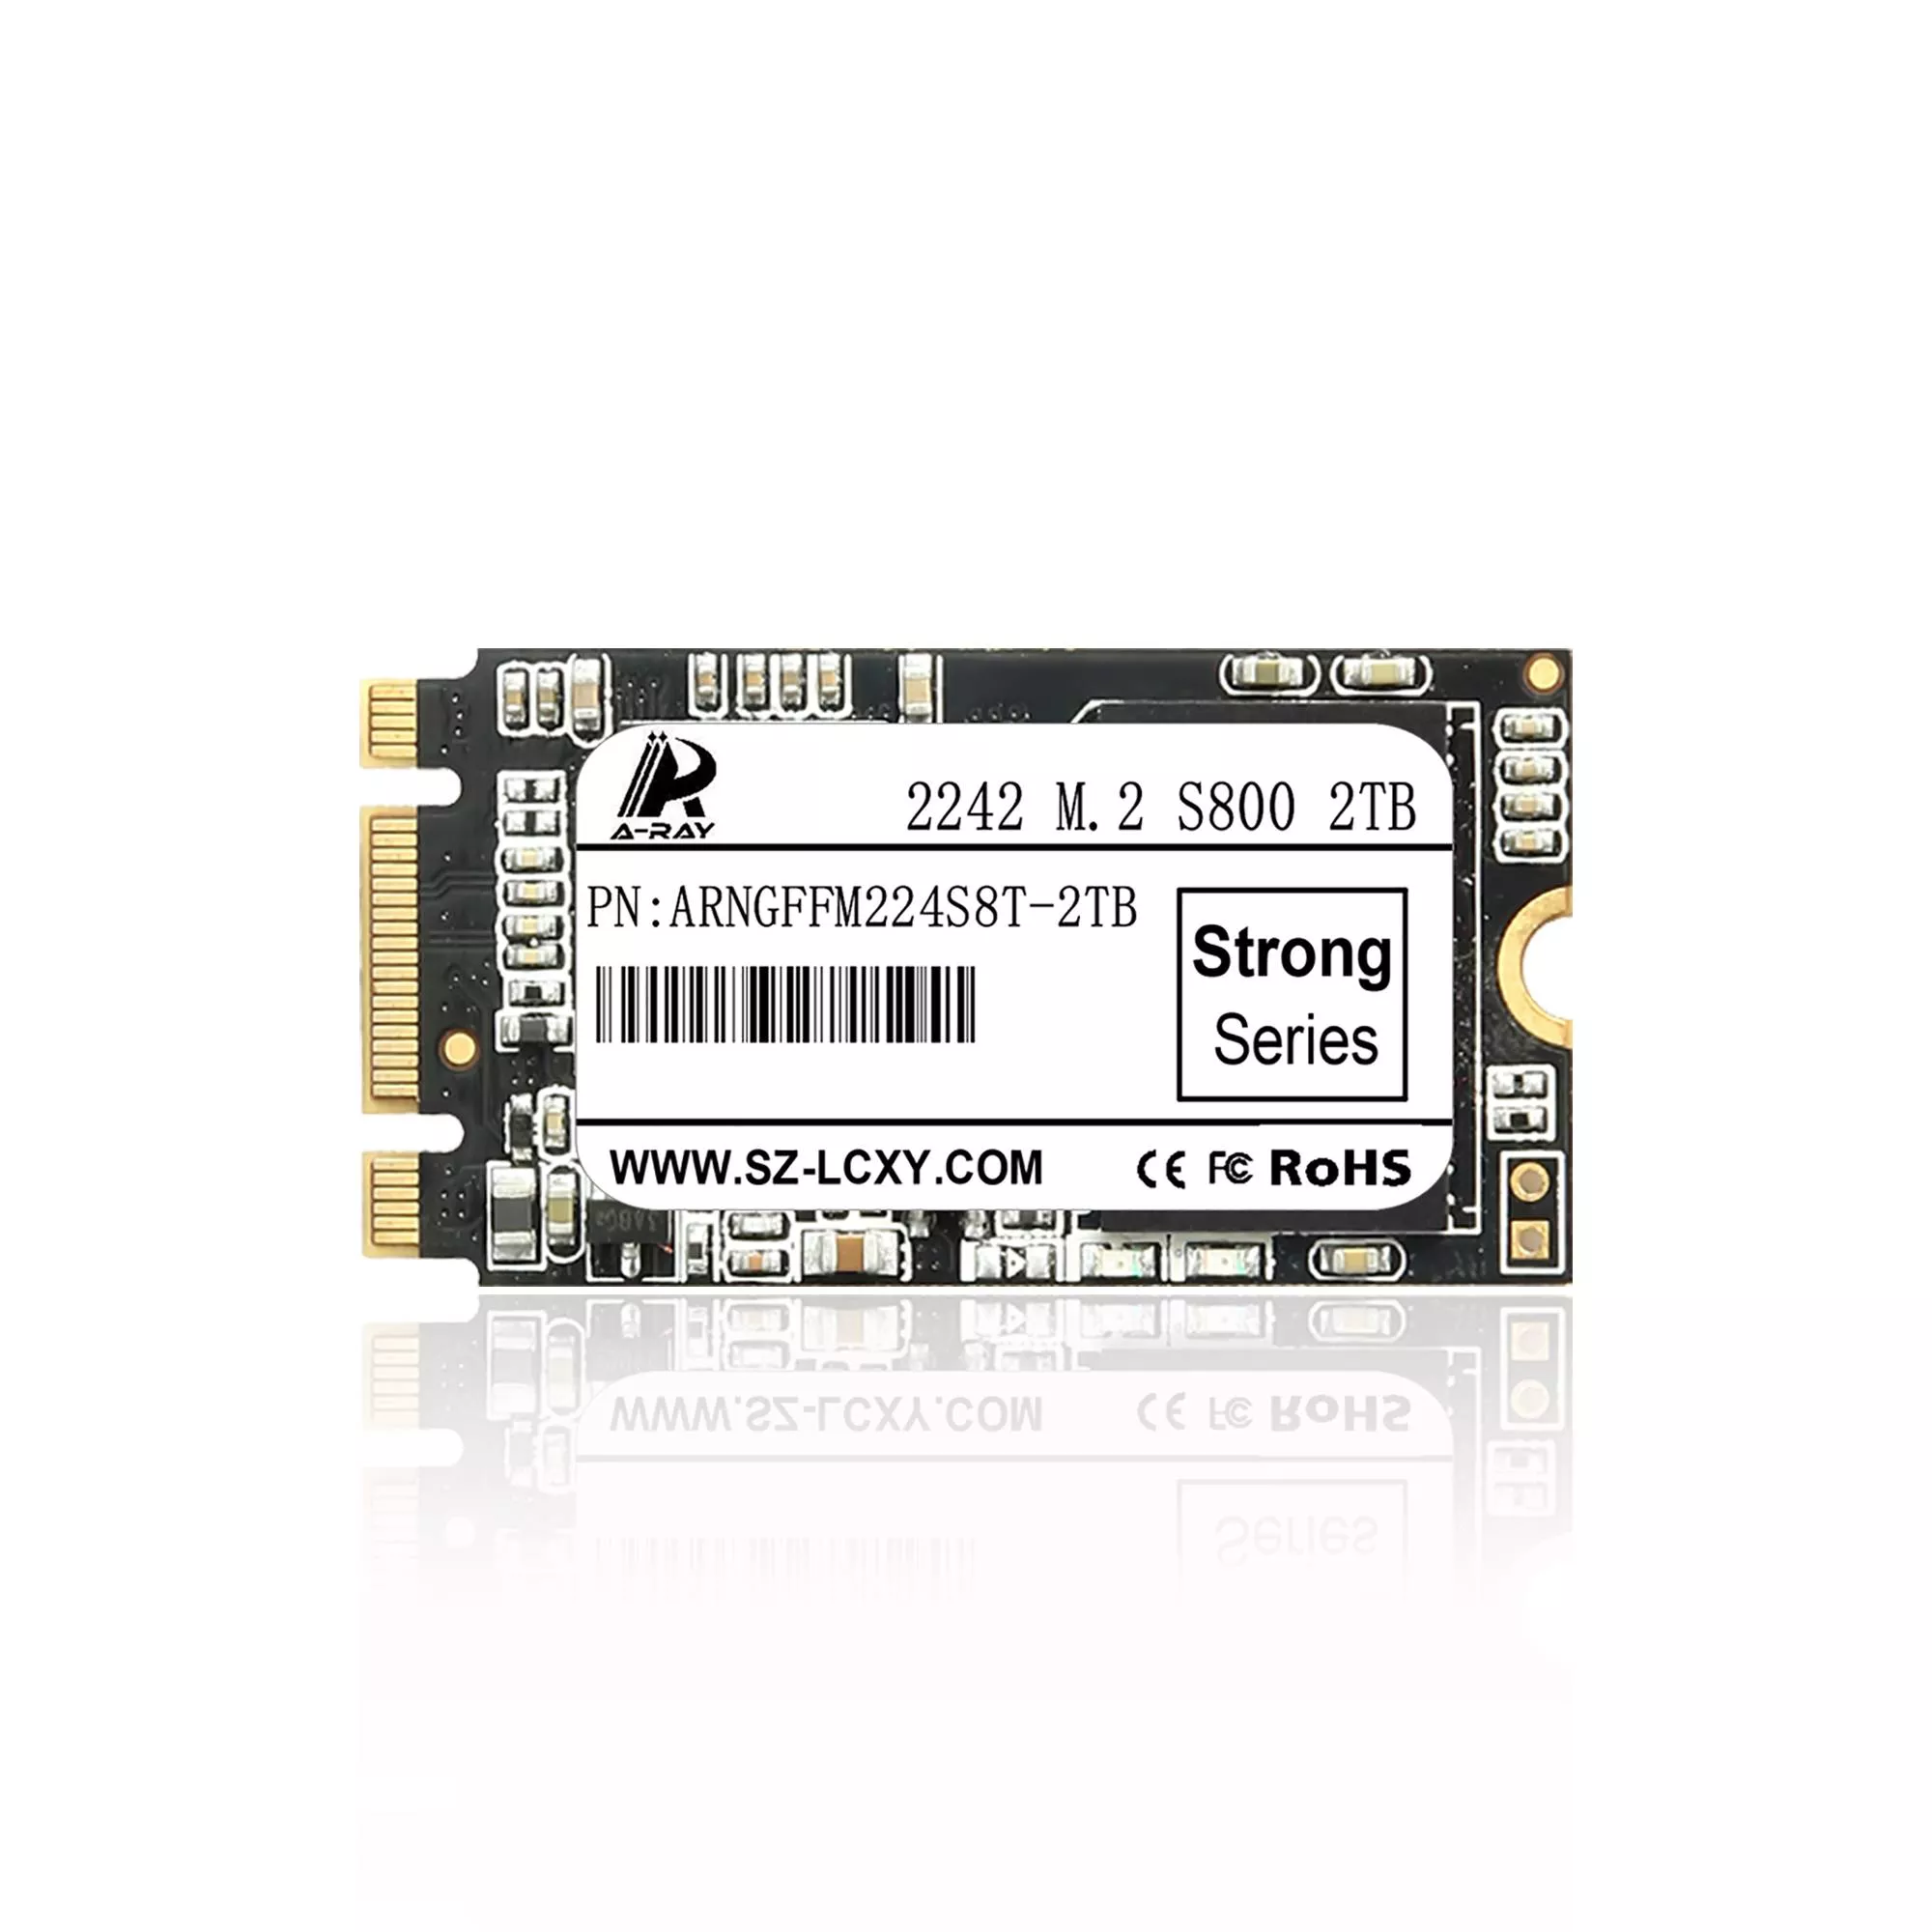 Ổ cứng SSD 2TB A-RAY 2242 NGFF M.2 6GBps S800 Strong Series